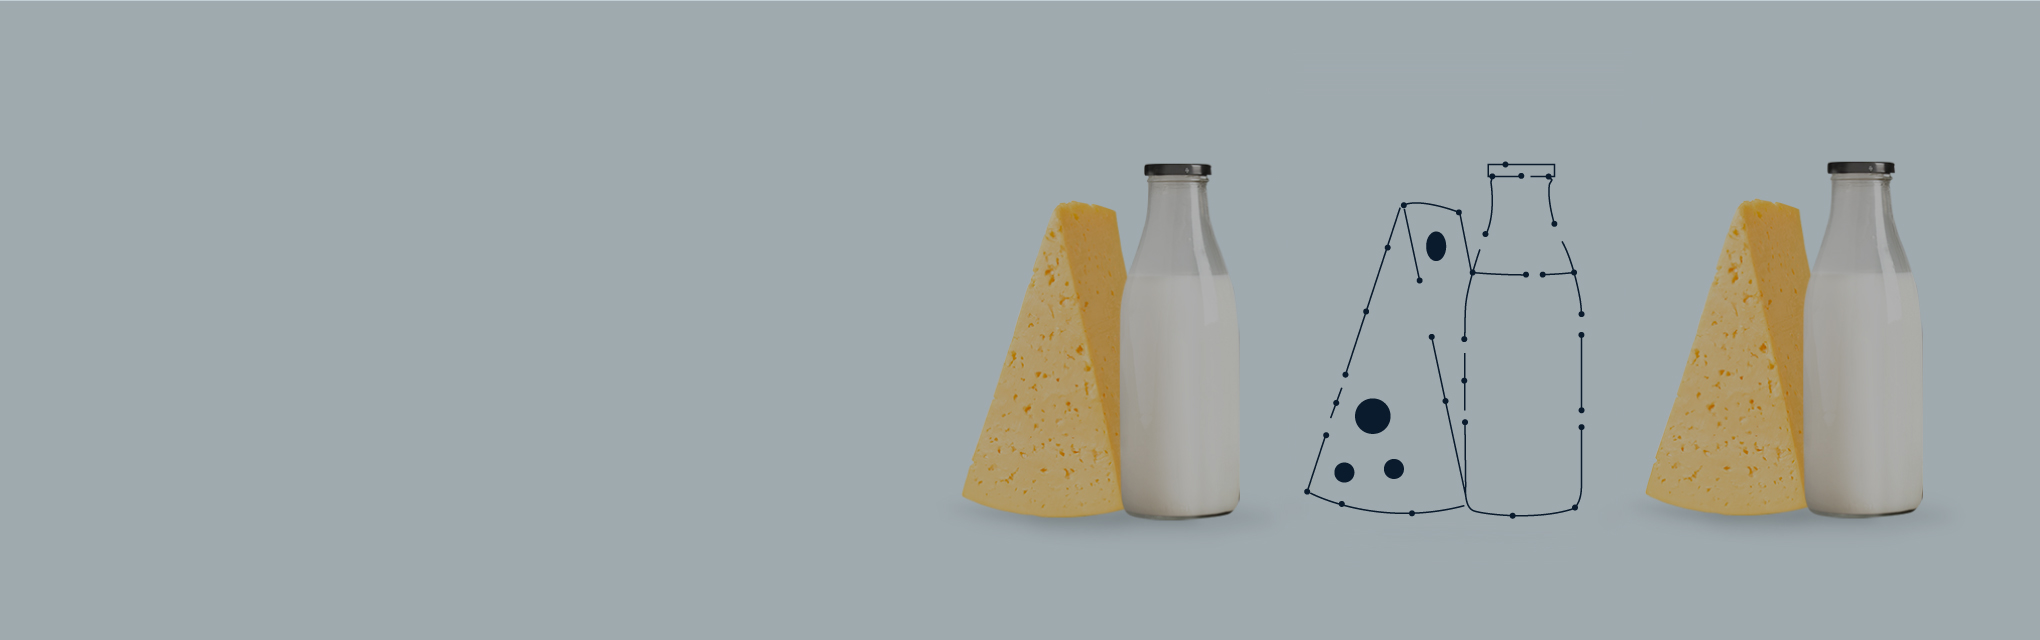 A bottle of milk and a piece of cheese on a blue background